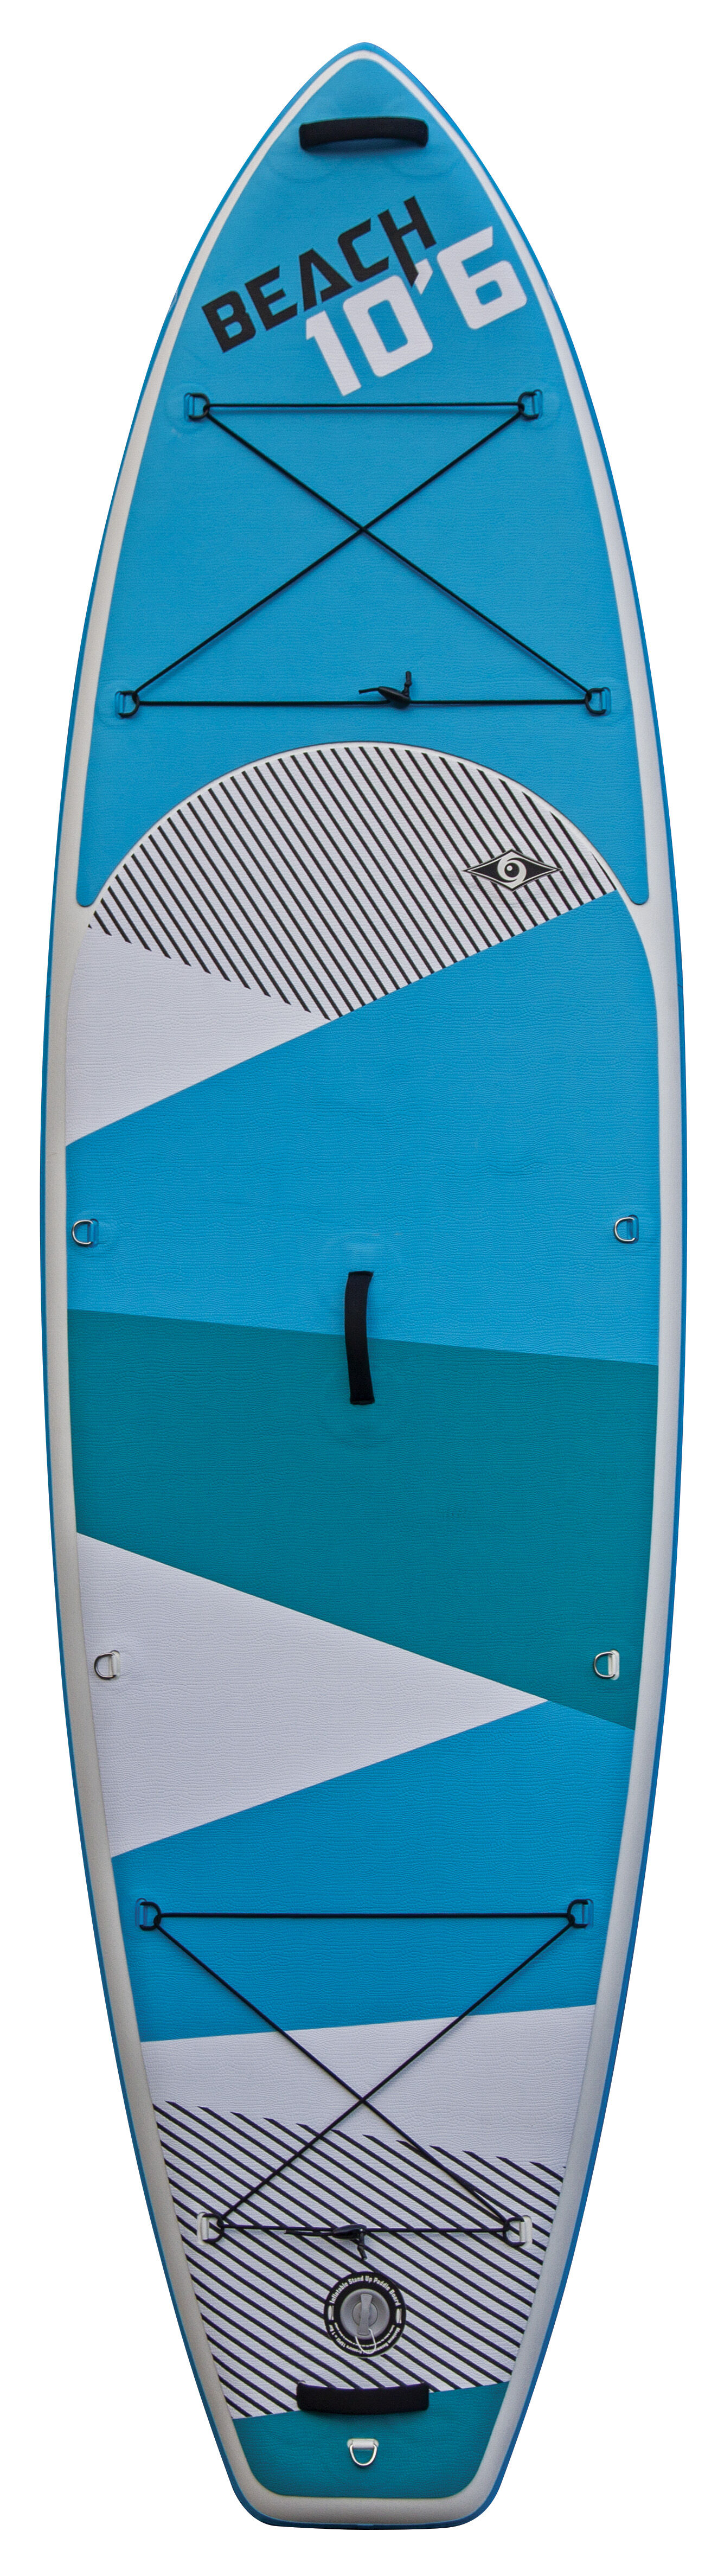 Tahe Outdoor 10'6 Sup Air Beach Pack - Inflatable paddle board